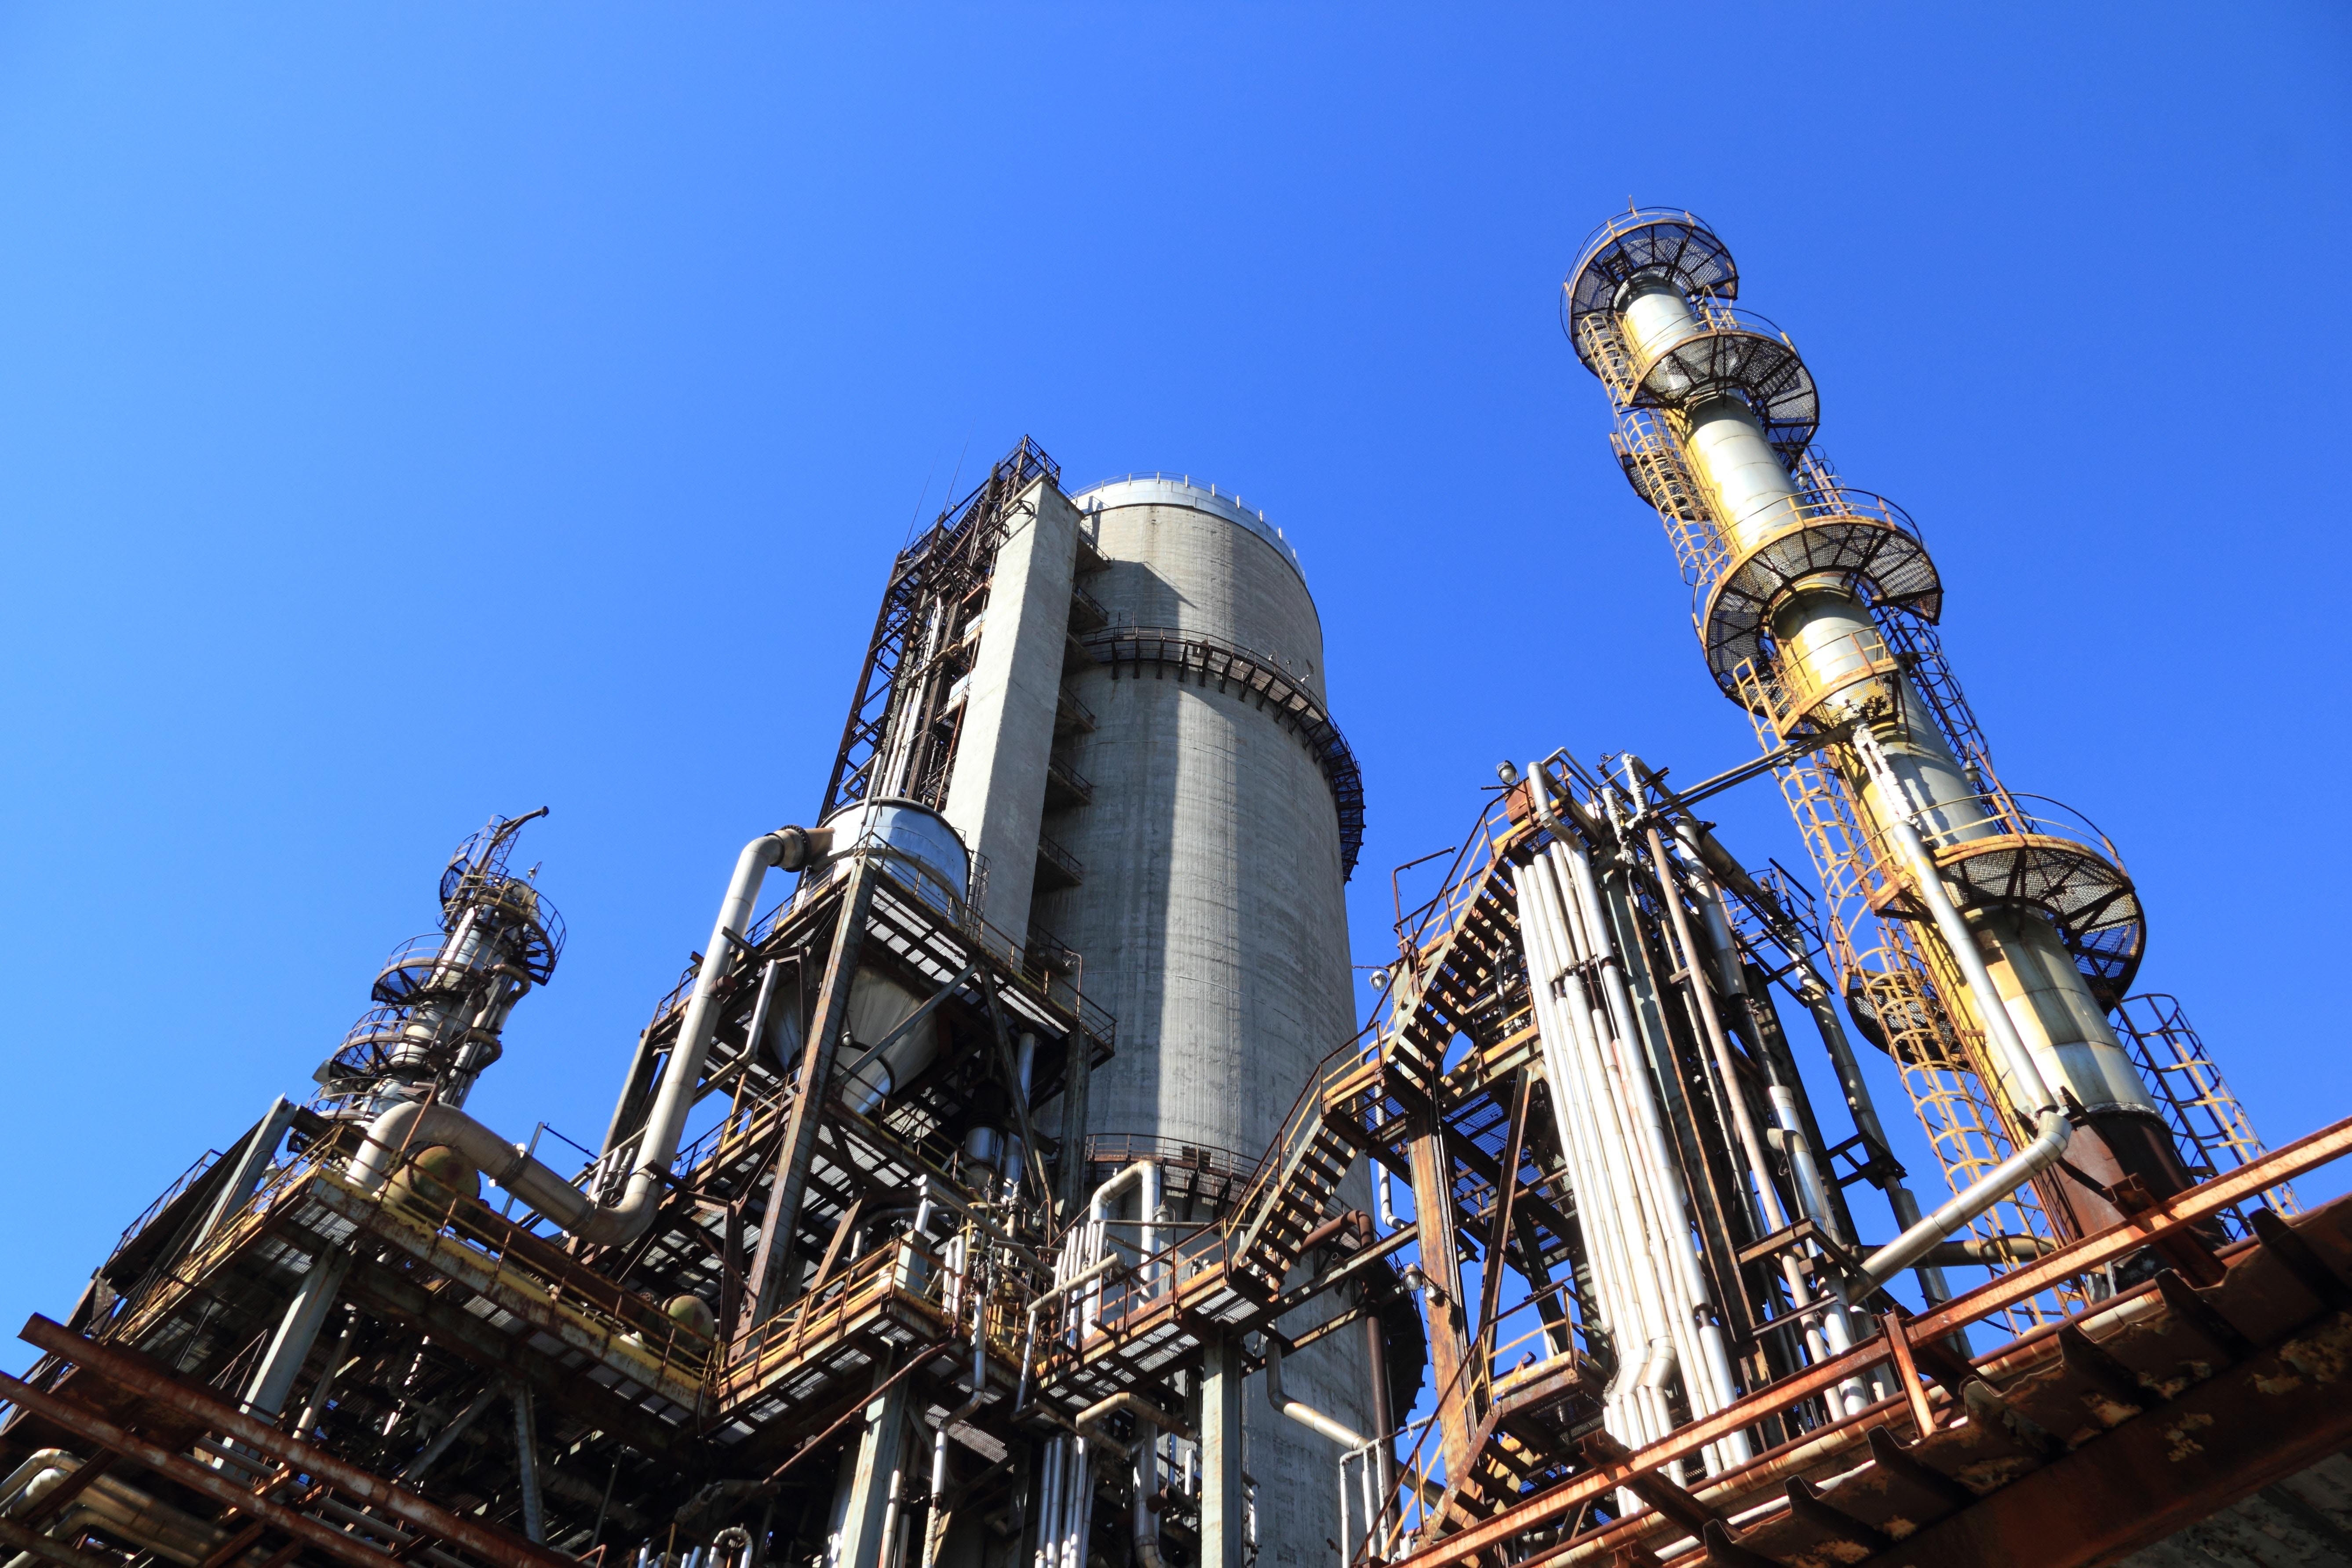 Image of a industrial refinery.